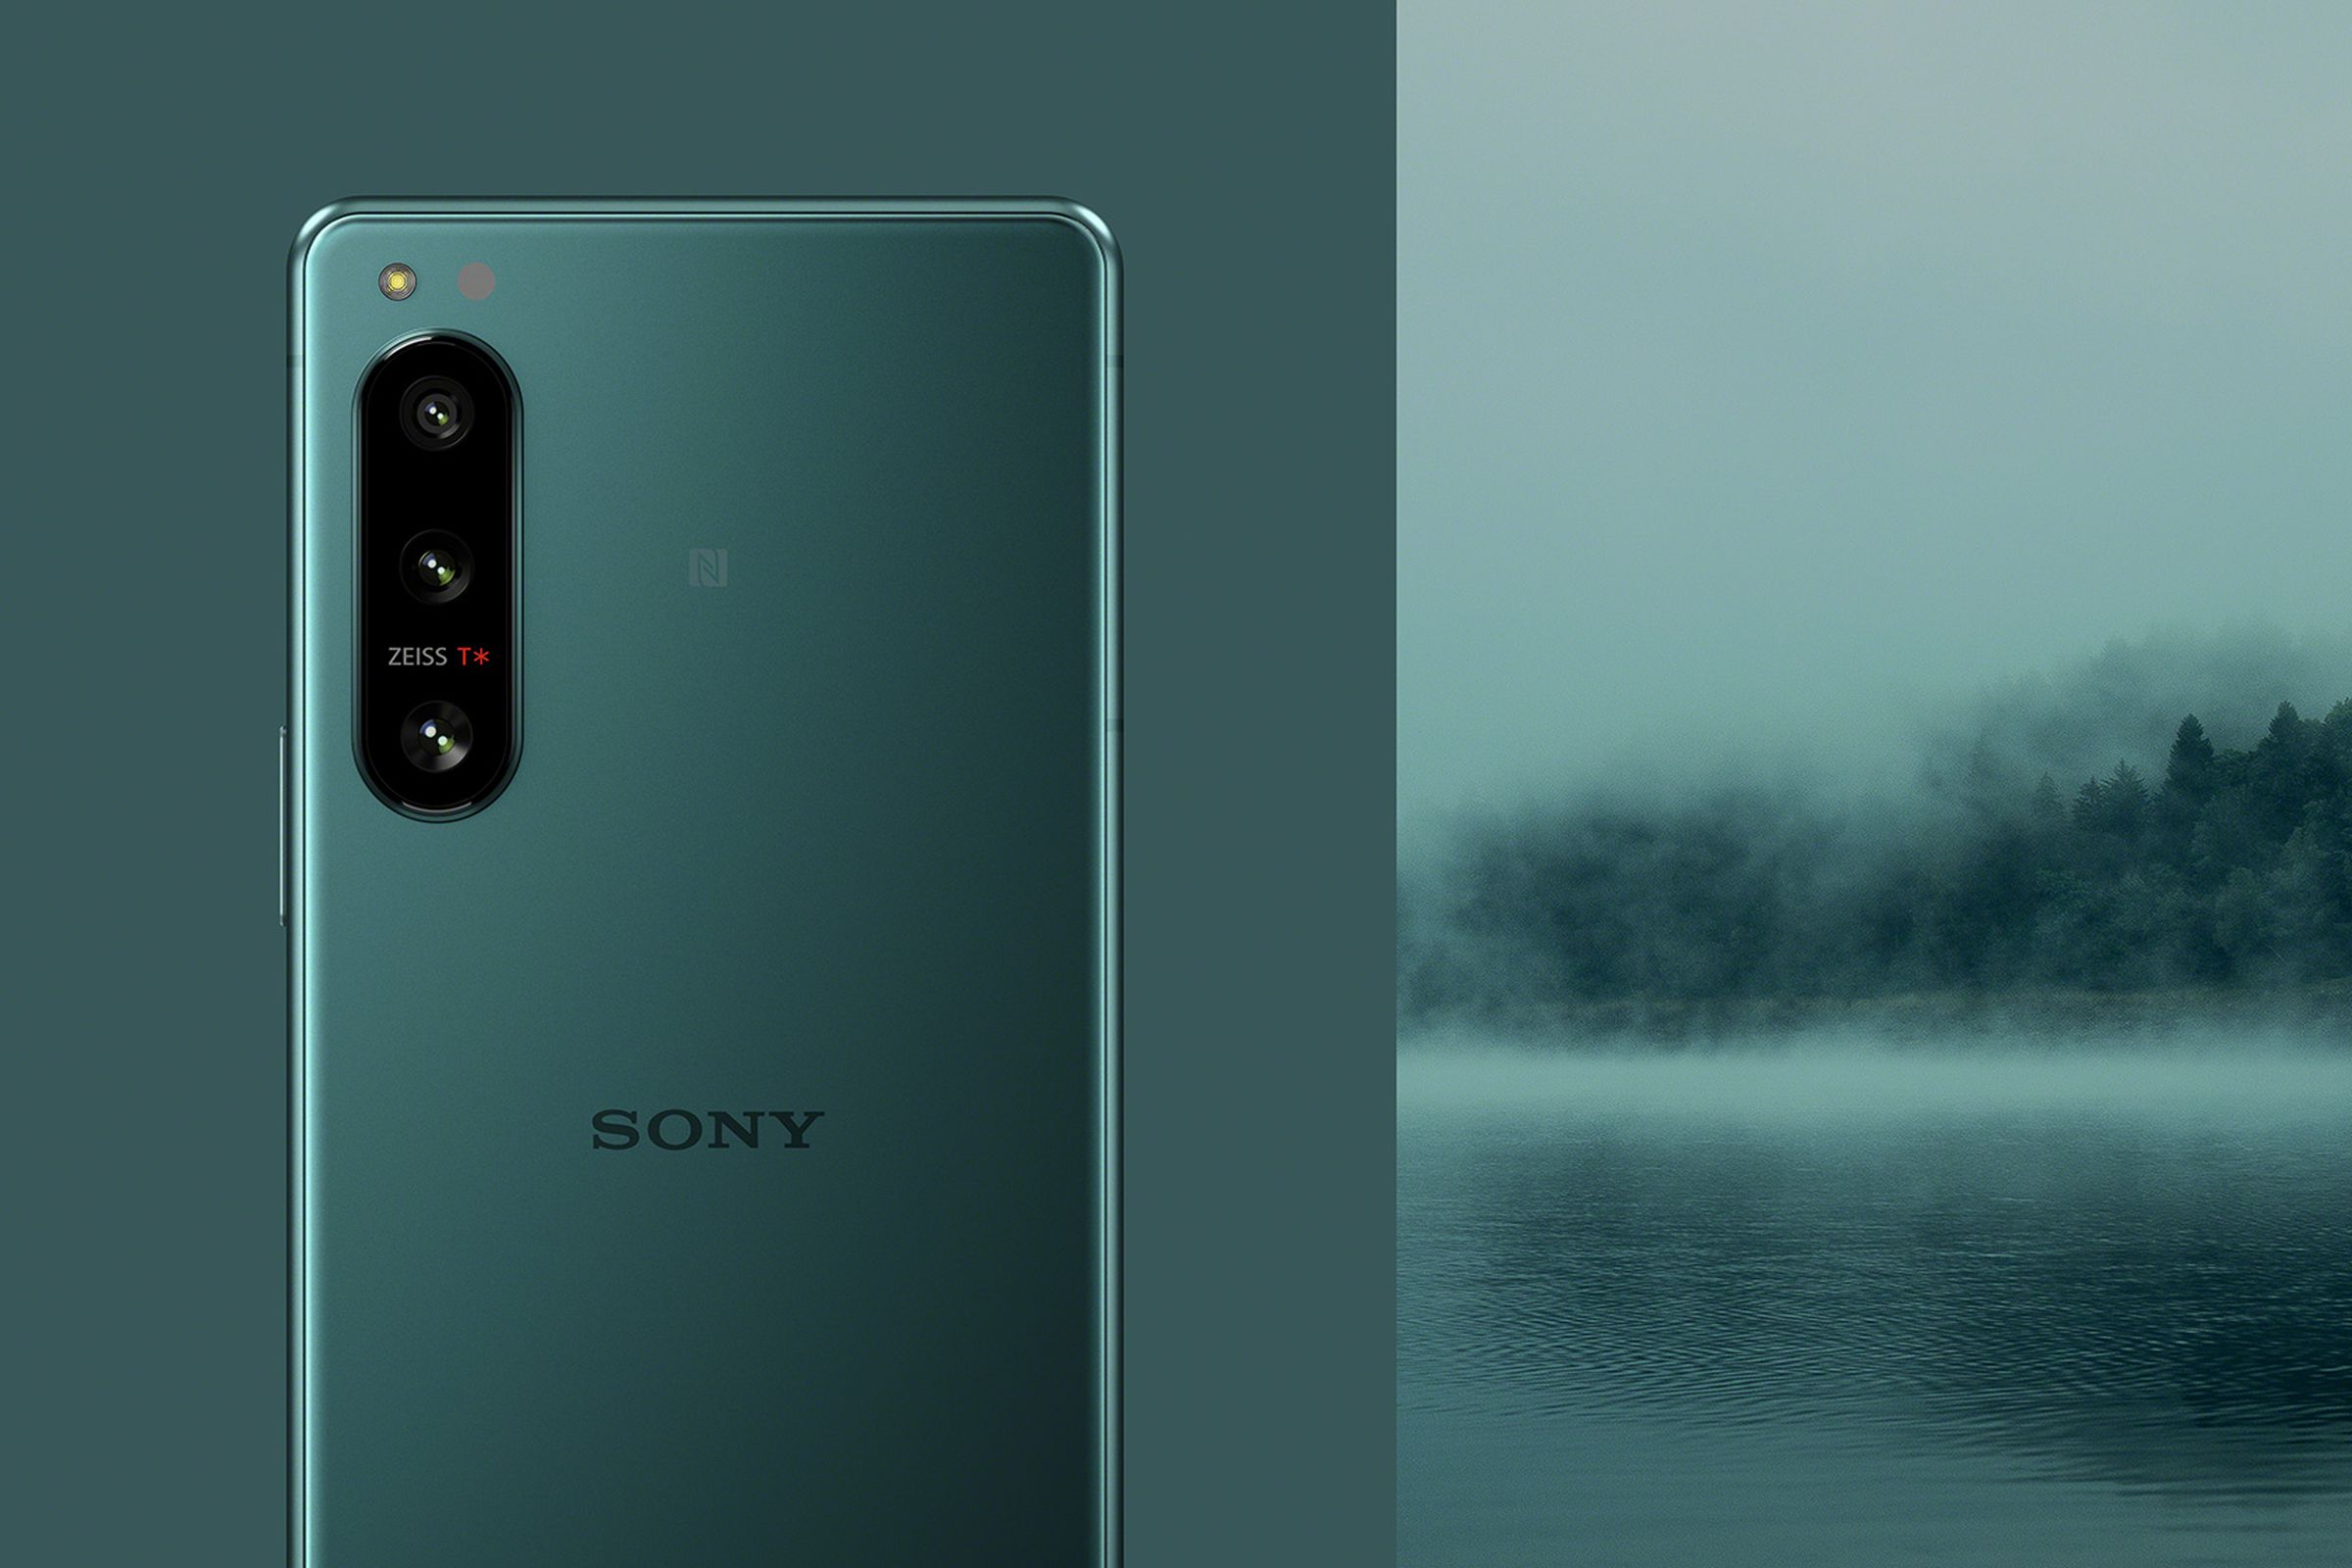 Sony’s excellent autofocus capabilities come to all three rear cameras in the Xperia 5 IV.